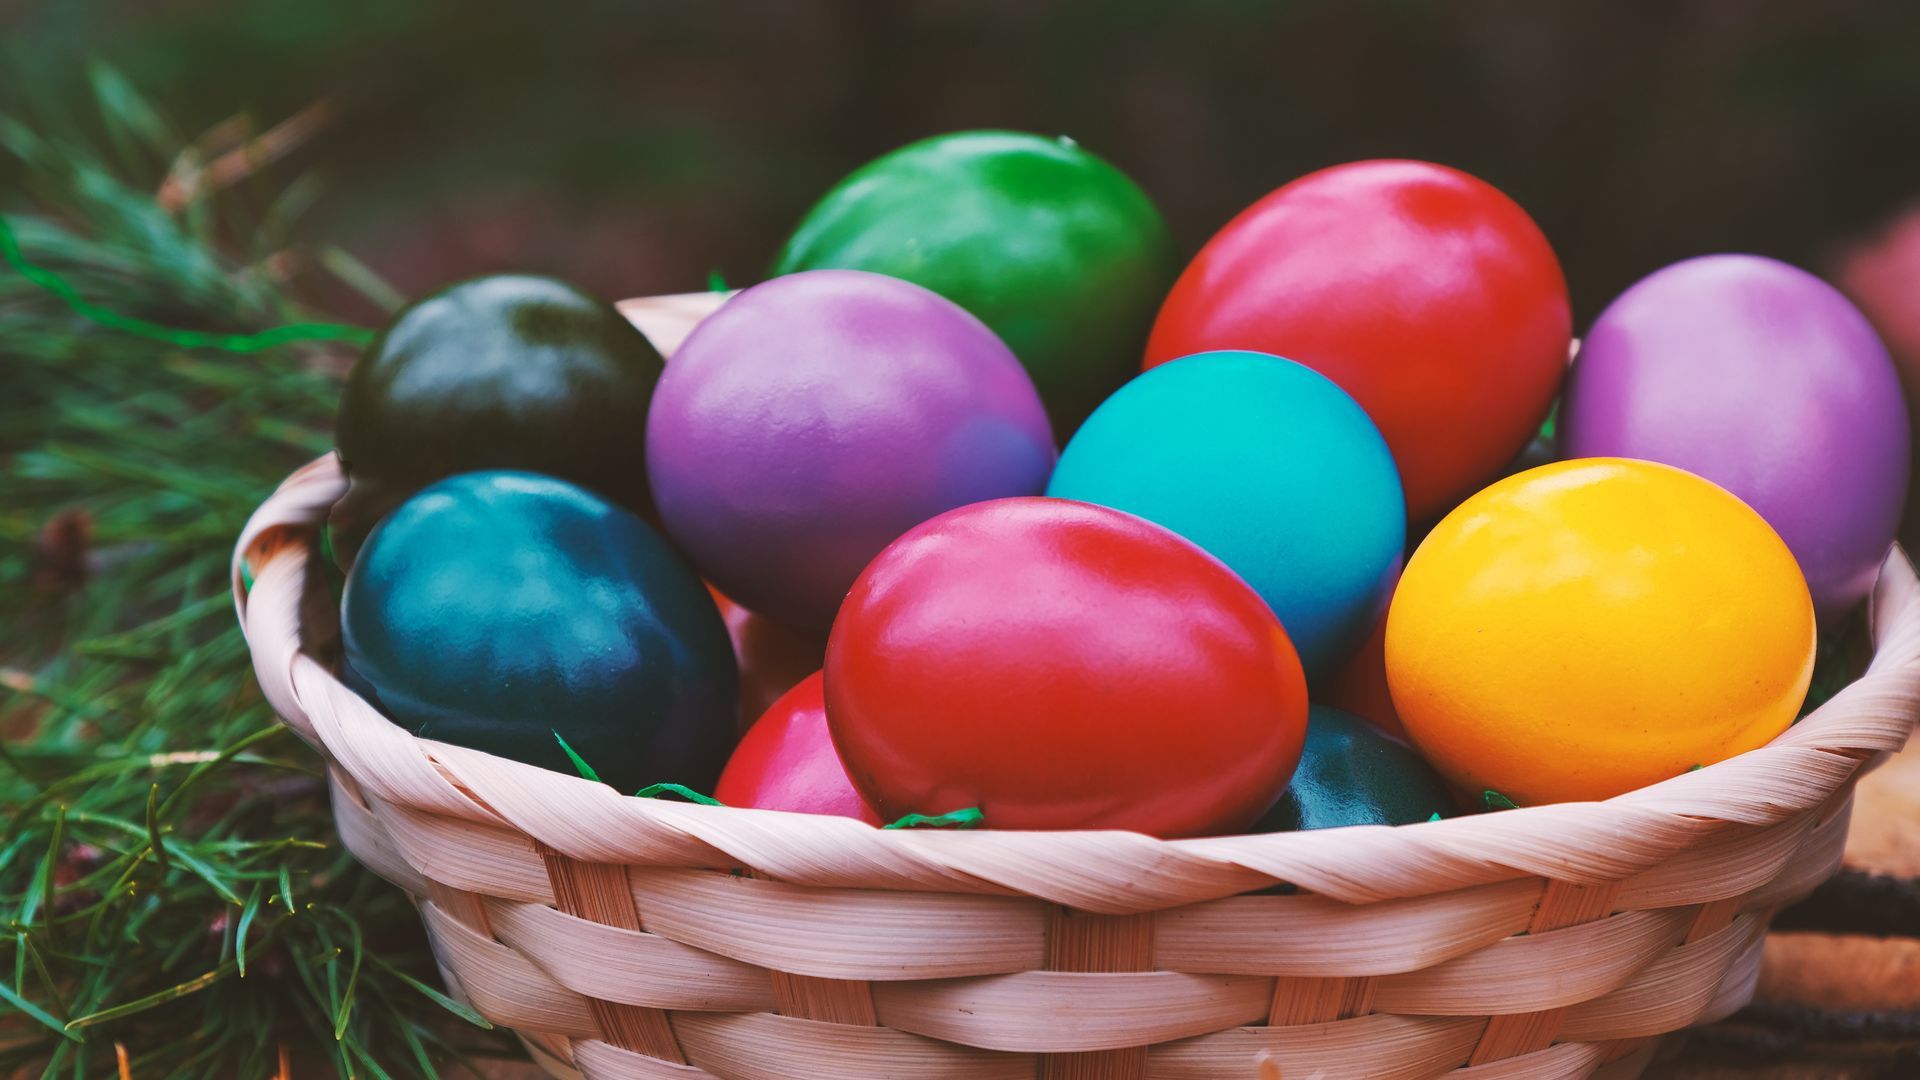 Download wallpaper 1920x1080 easter, eggs, colorful, basket full hd, hdtv, fhd, 1080p HD background